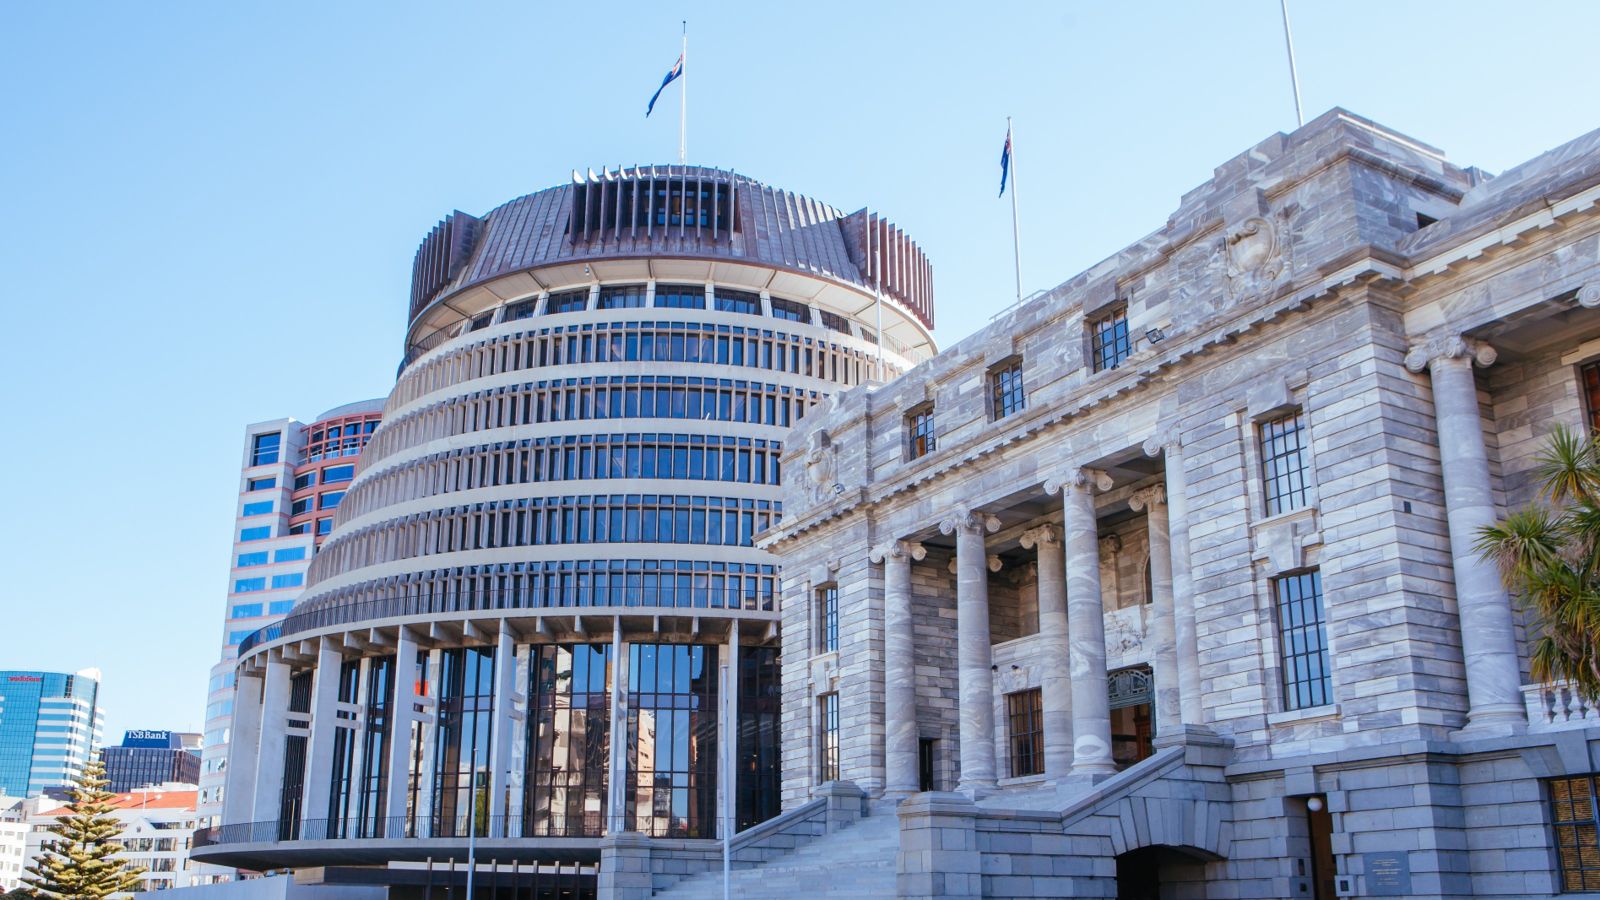 Wellington Government beehive with Government house on the right-side and blue skies surrounding.